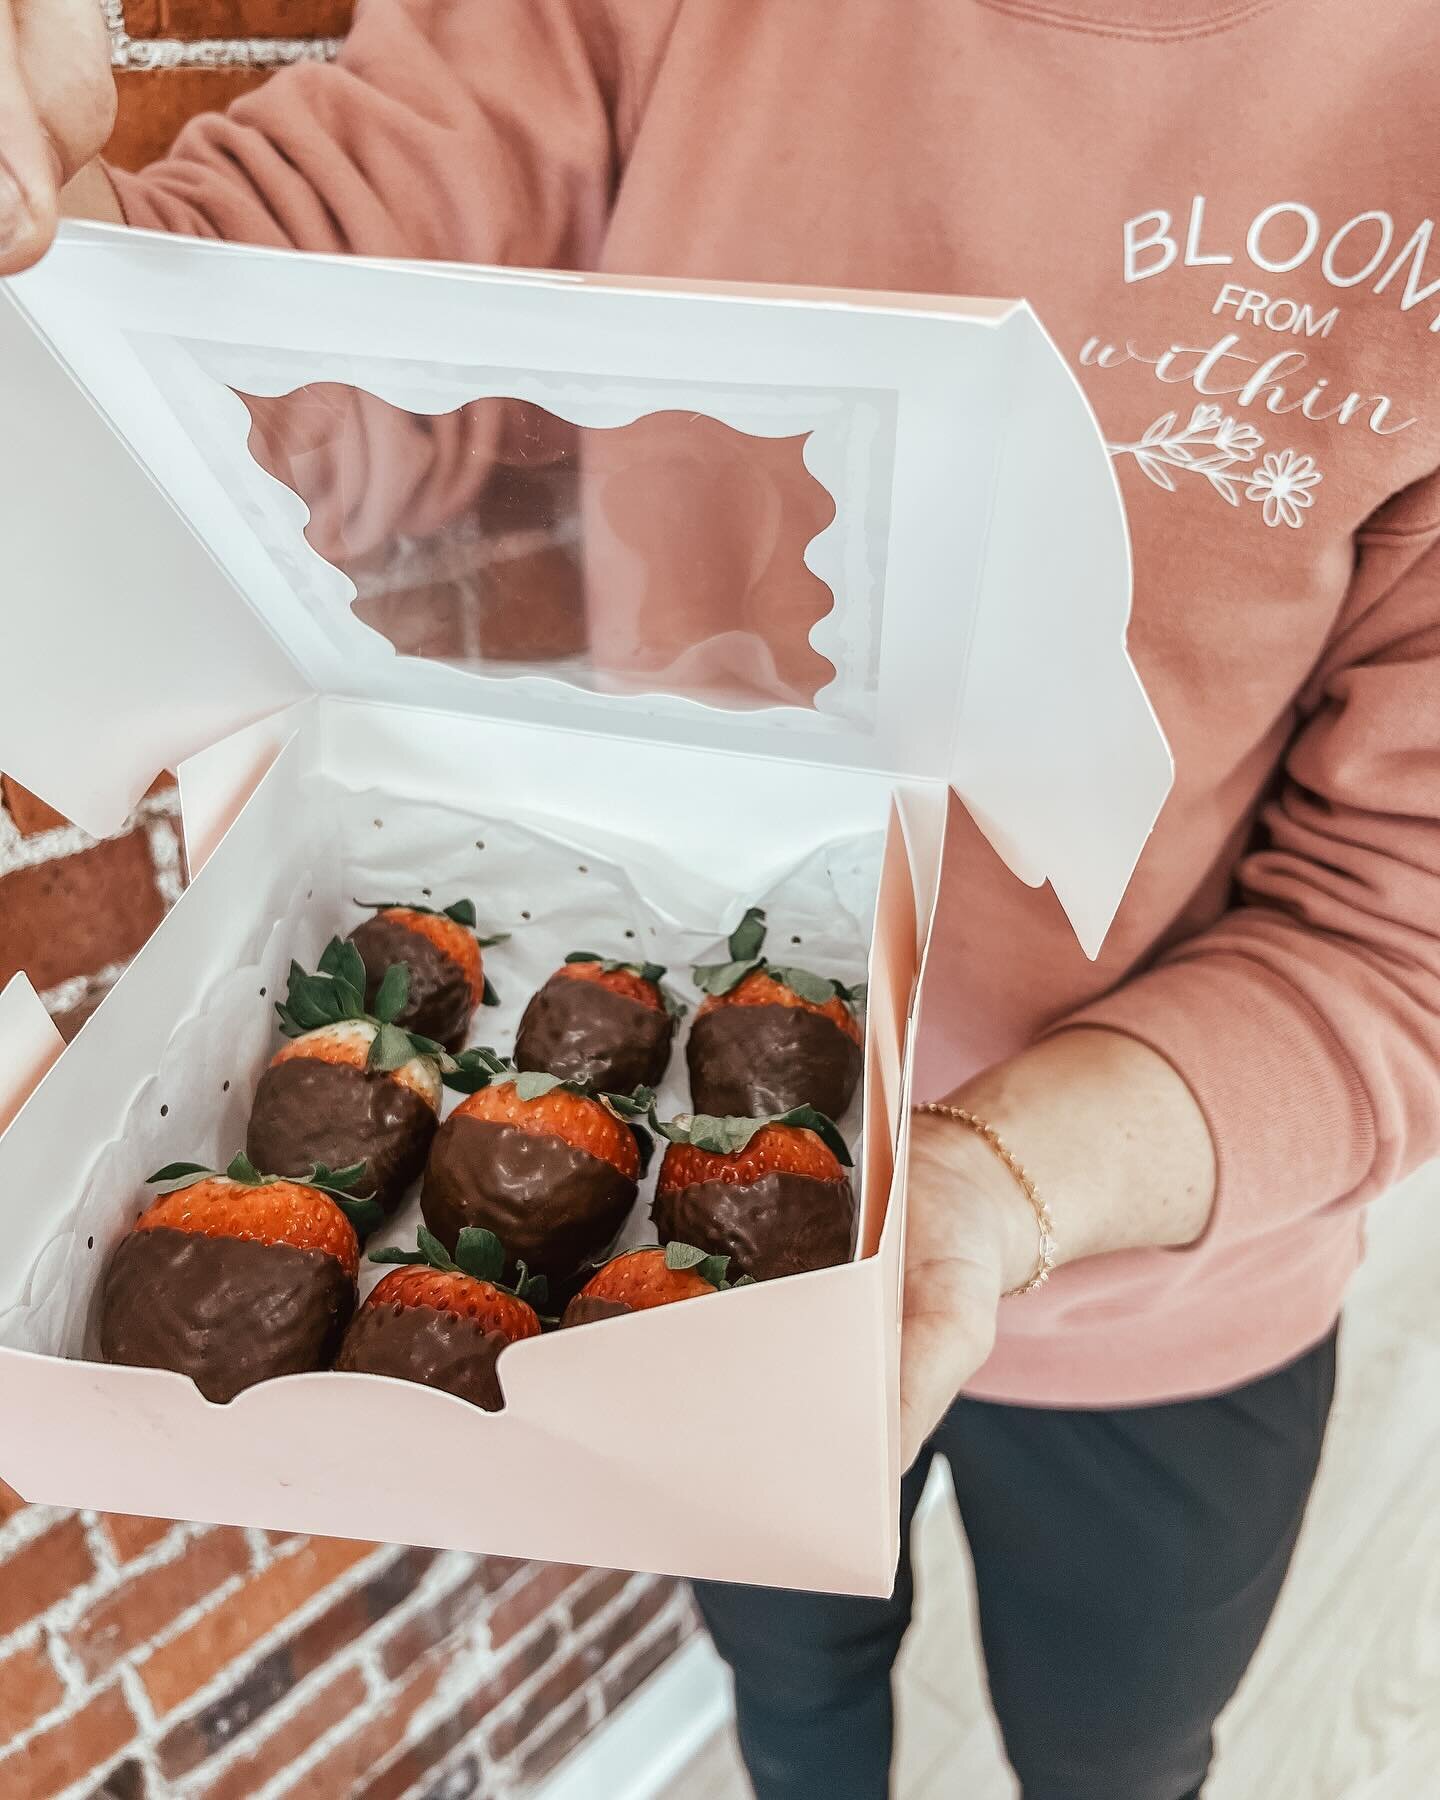 Chocolate Covered Strawberry Boxes AVAILABLE! 🍓🍫

Need a last minute treat? We&rsquo;ve had lots of requests for some extra Valentine&rsquo;s Day boxes so we whipped up a few extra boxes of chocolate-covered strawberries! 

Each box is $13 and will